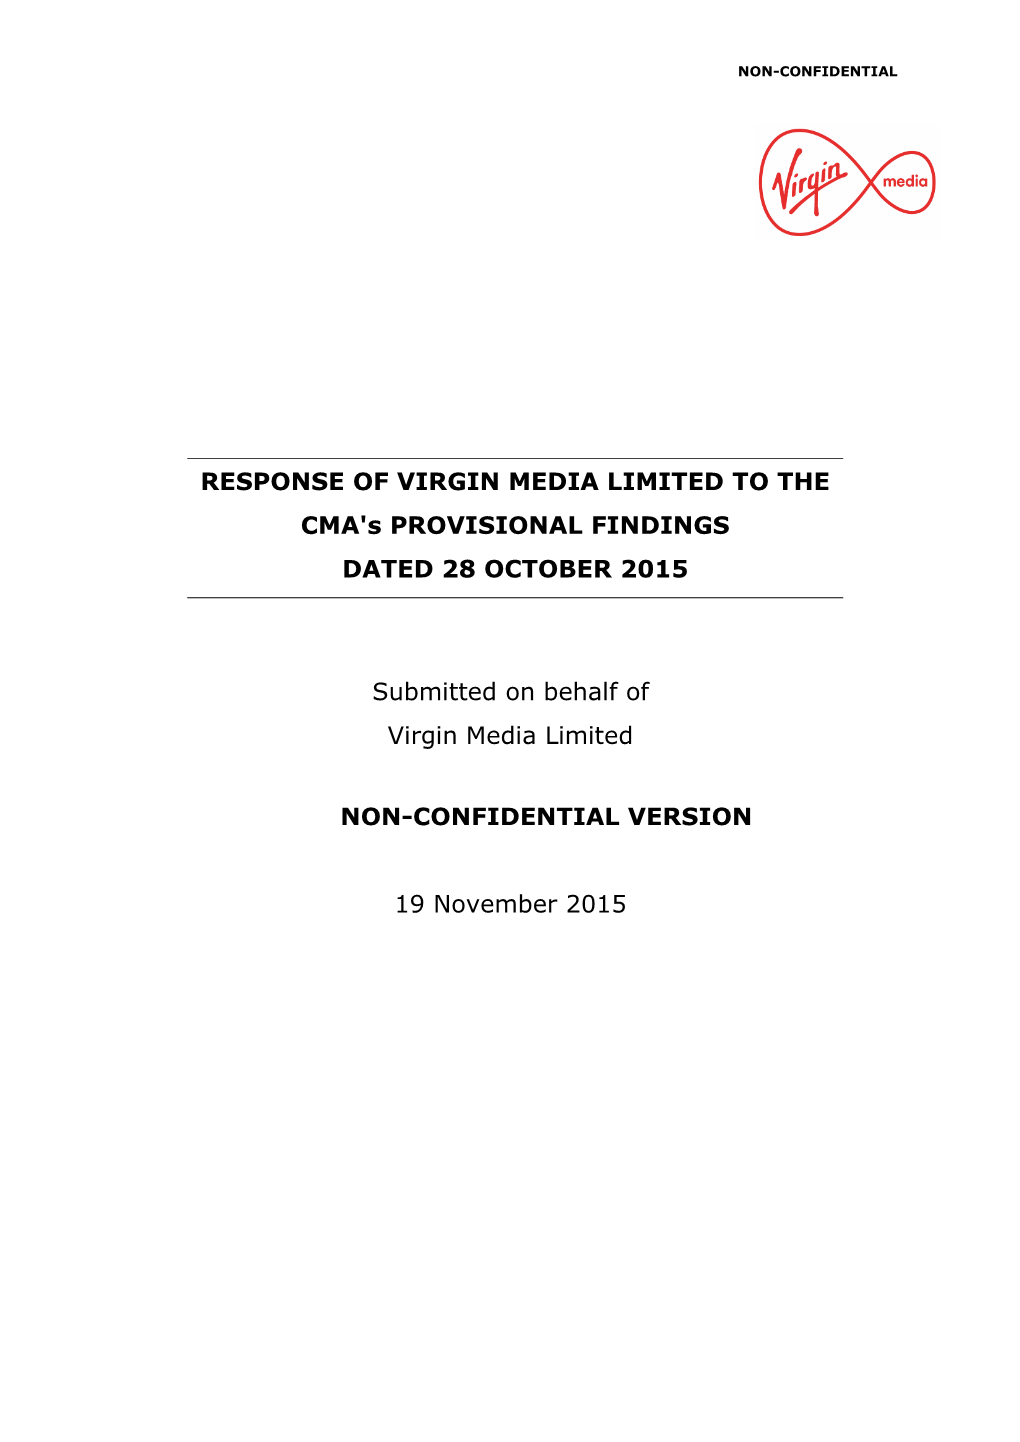 VIRGIN MEDIA LIMITED to the CMA's PROVISIONAL FINDINGS DATED 28 OCTOBER 2015